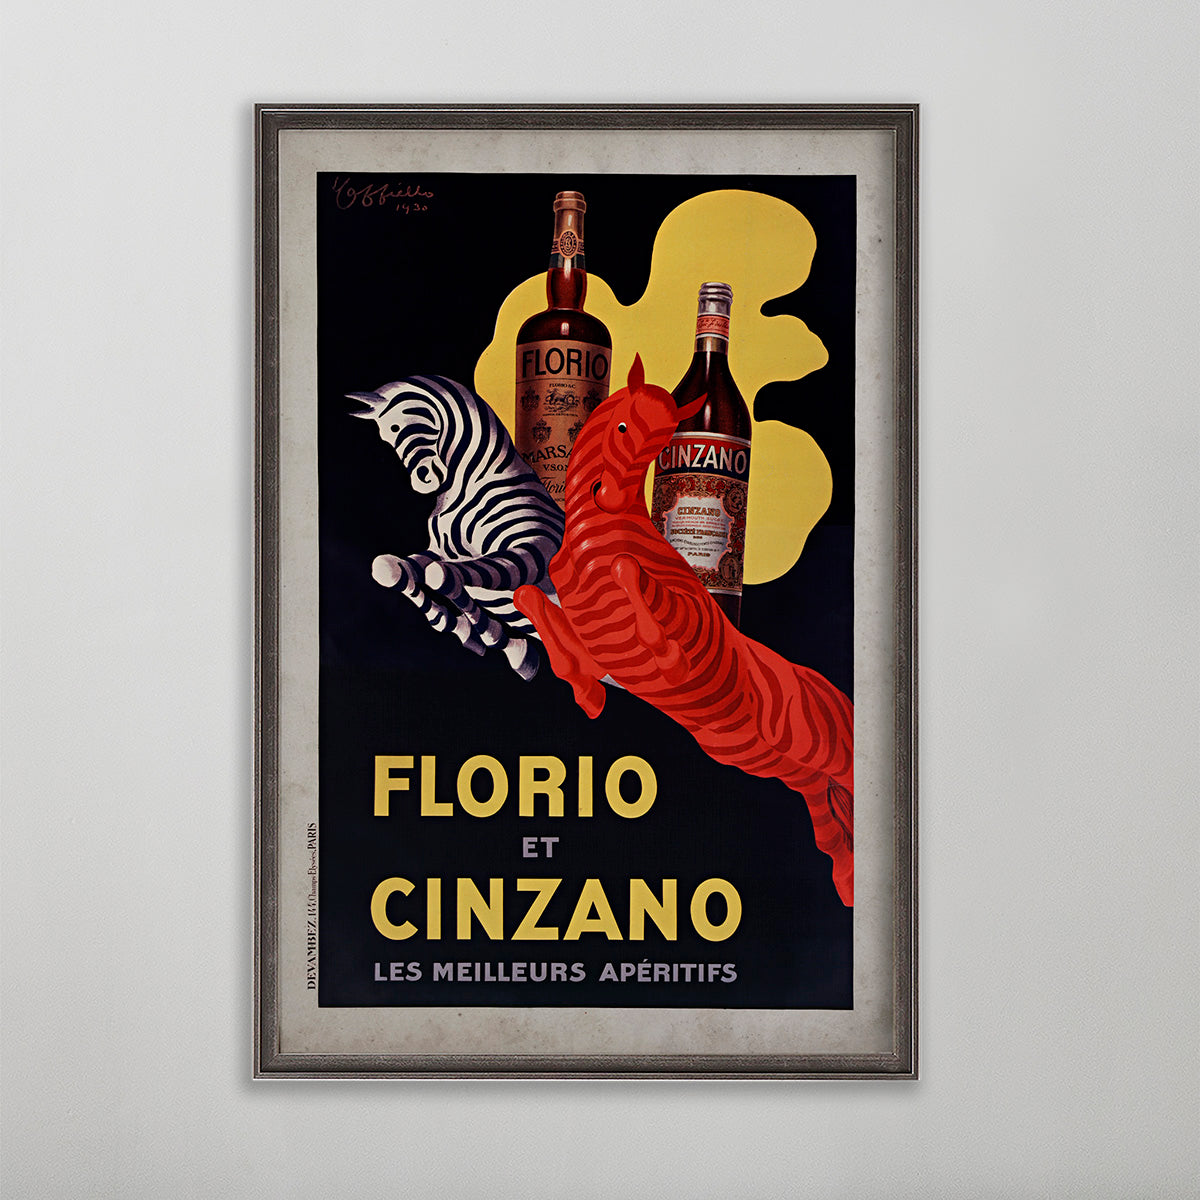 Florio et Cinzano vintage poster wall art by leonetto cappiello. Poster portrays a white and red zebra.